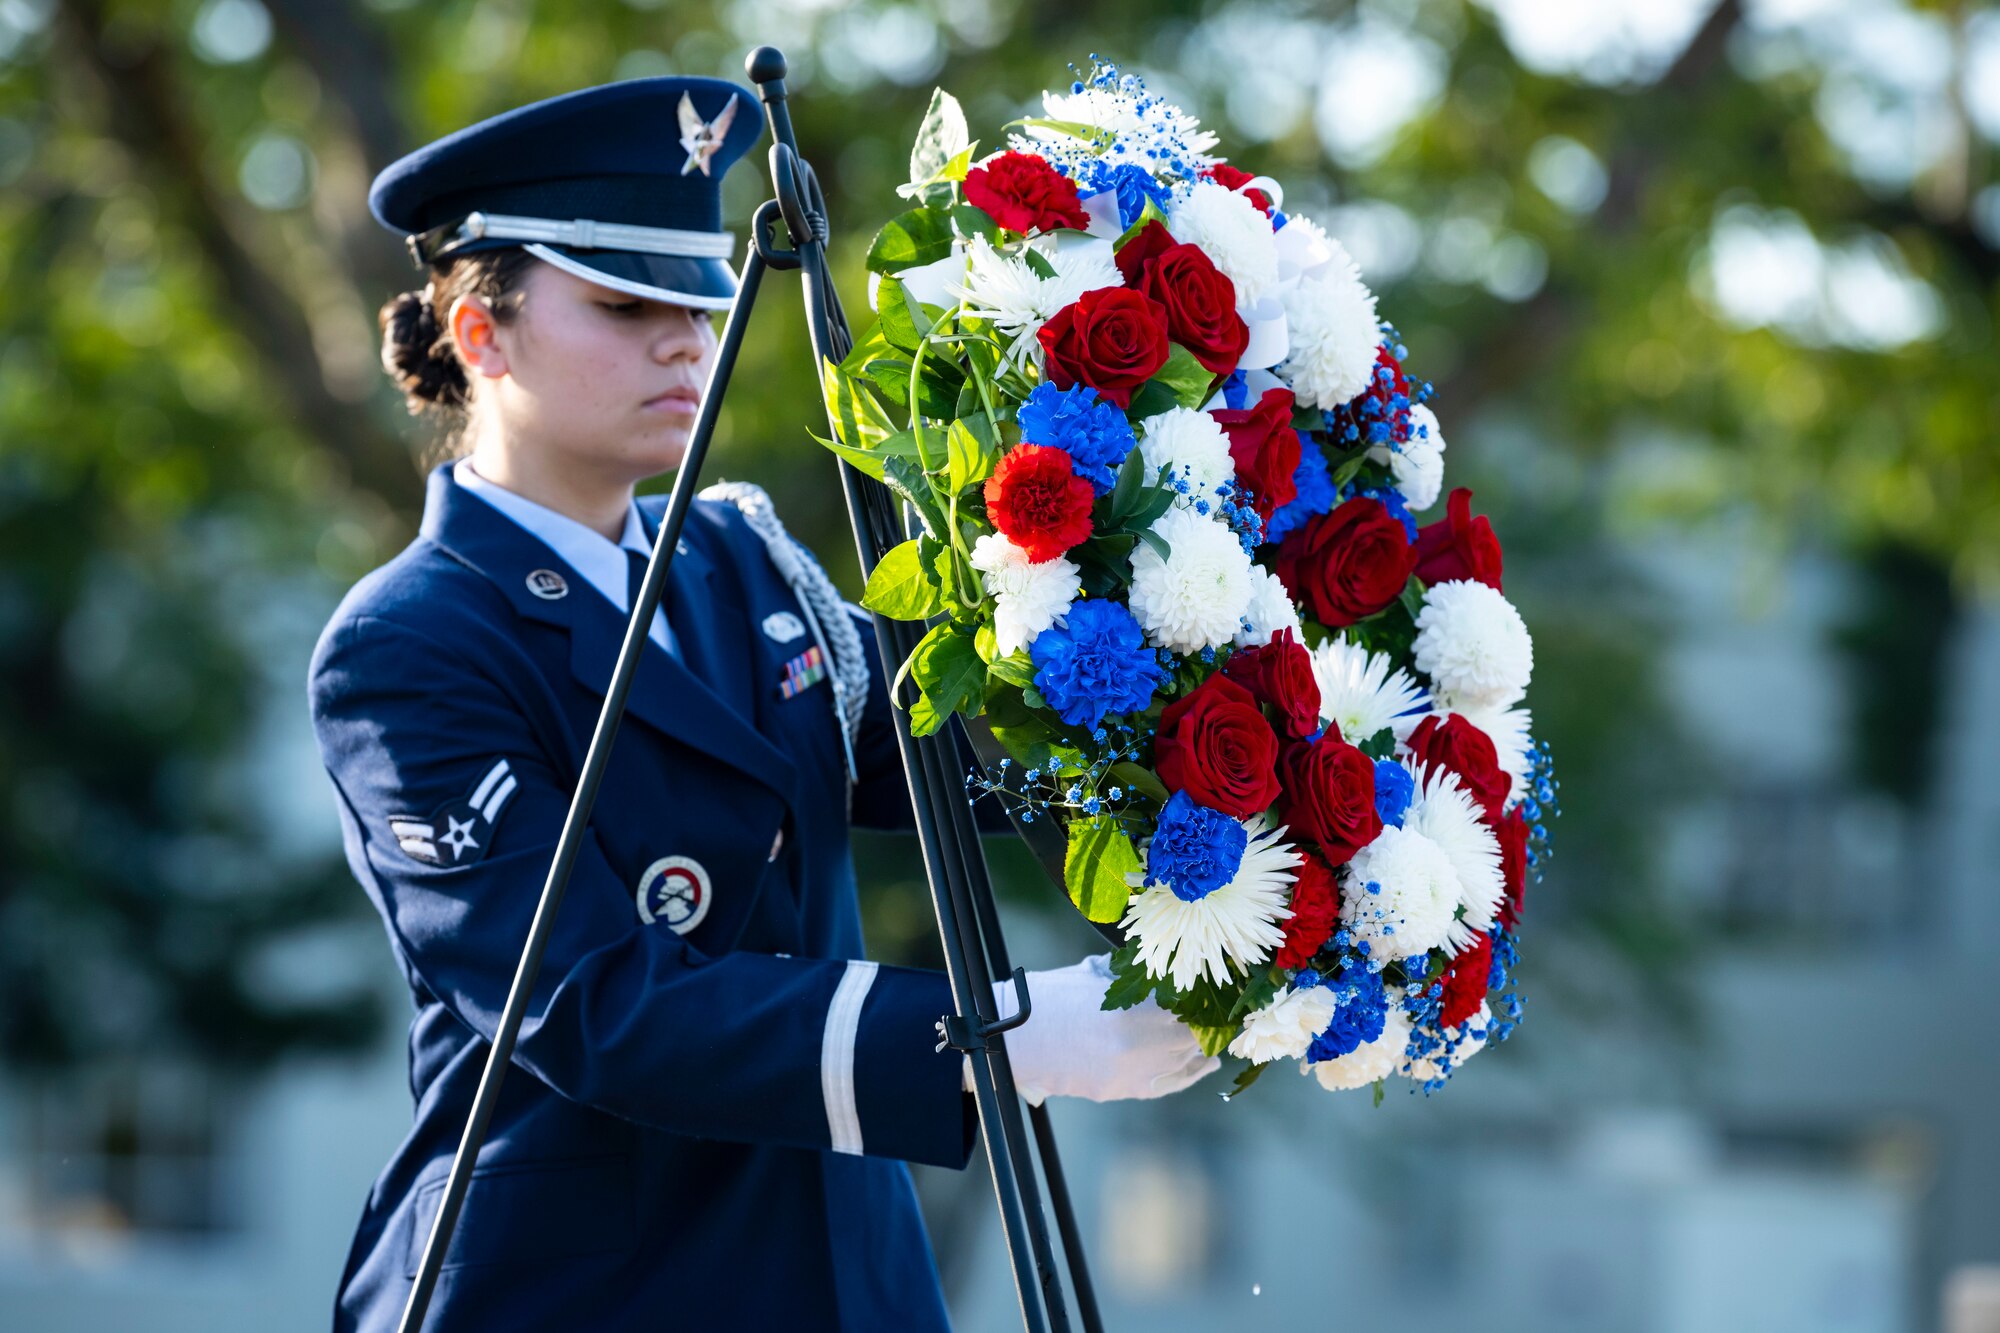 U.S. Air Force members in dress blues lifts a flower wreath off a stand.